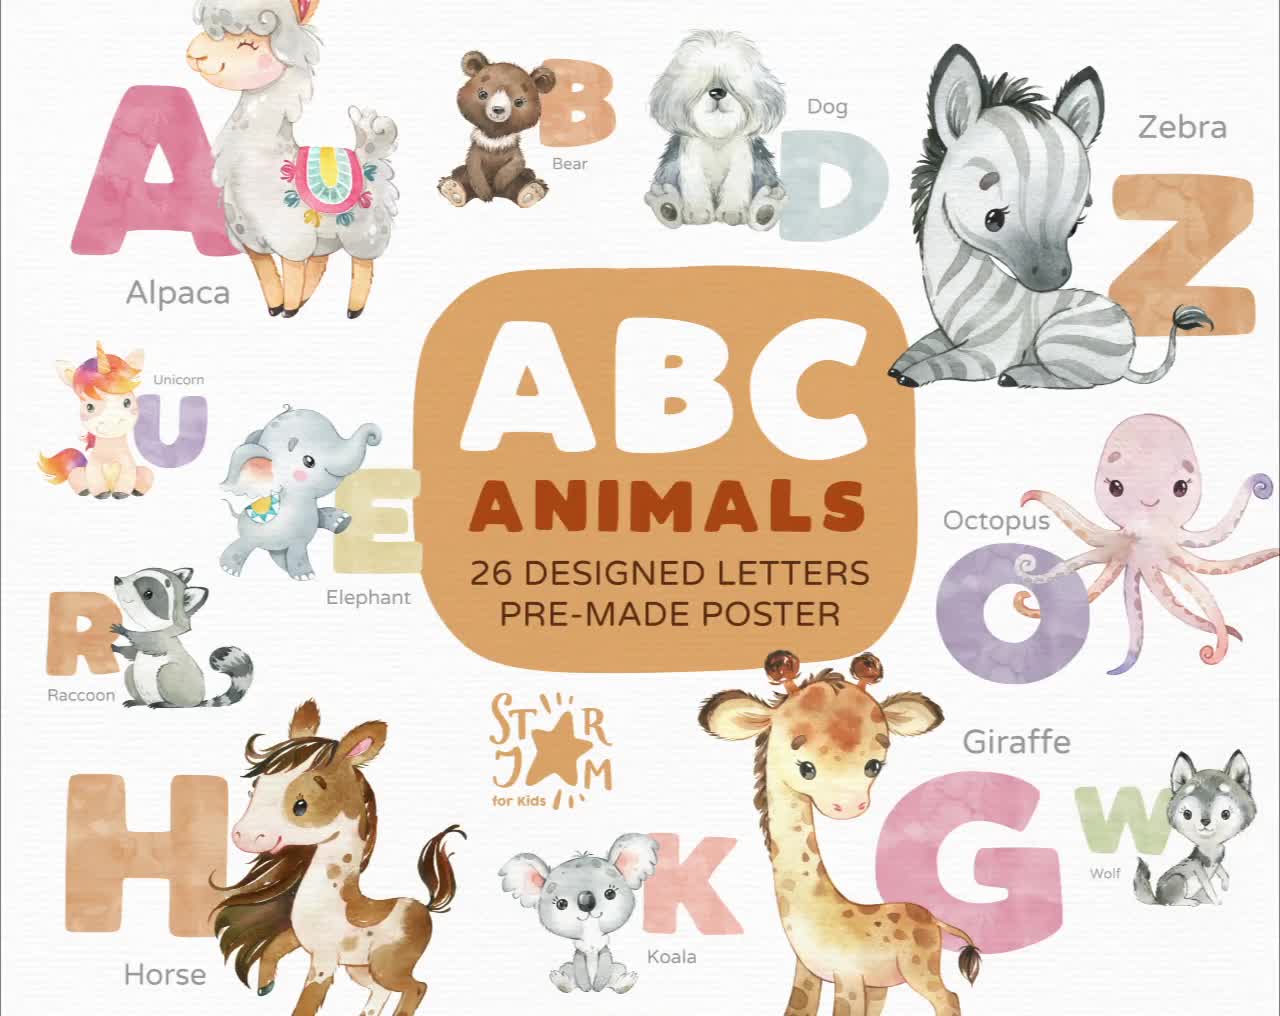 Boo ABC: A to Z with the World's Cutest Dog